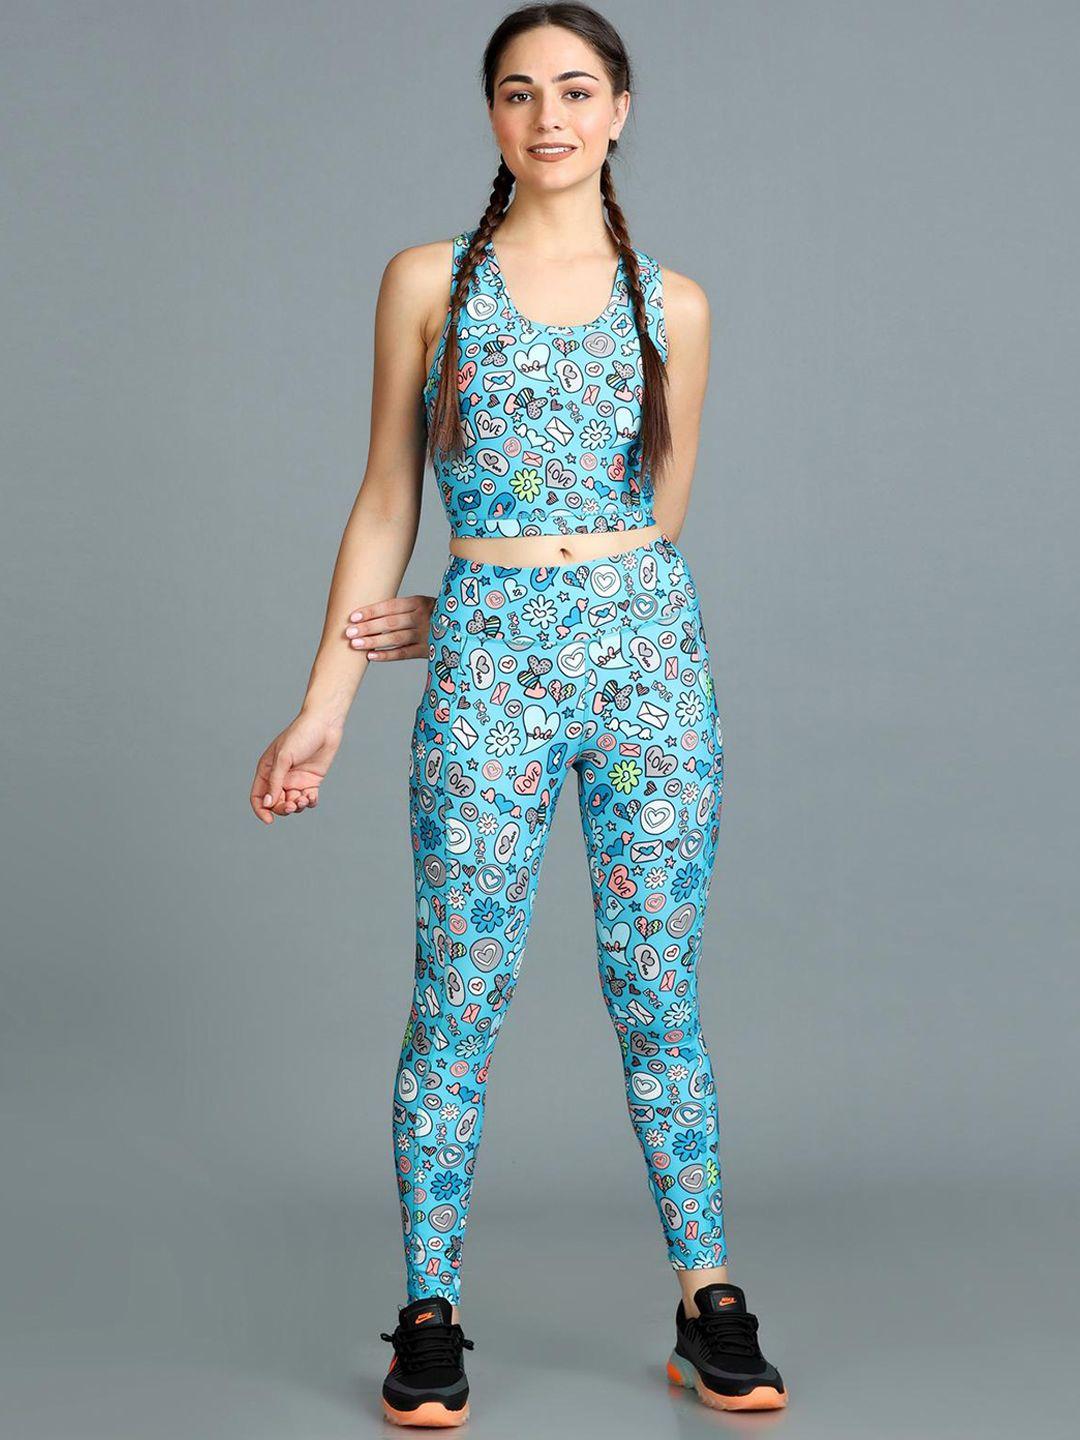 the dance bible printed padded sports top & activewear leggings